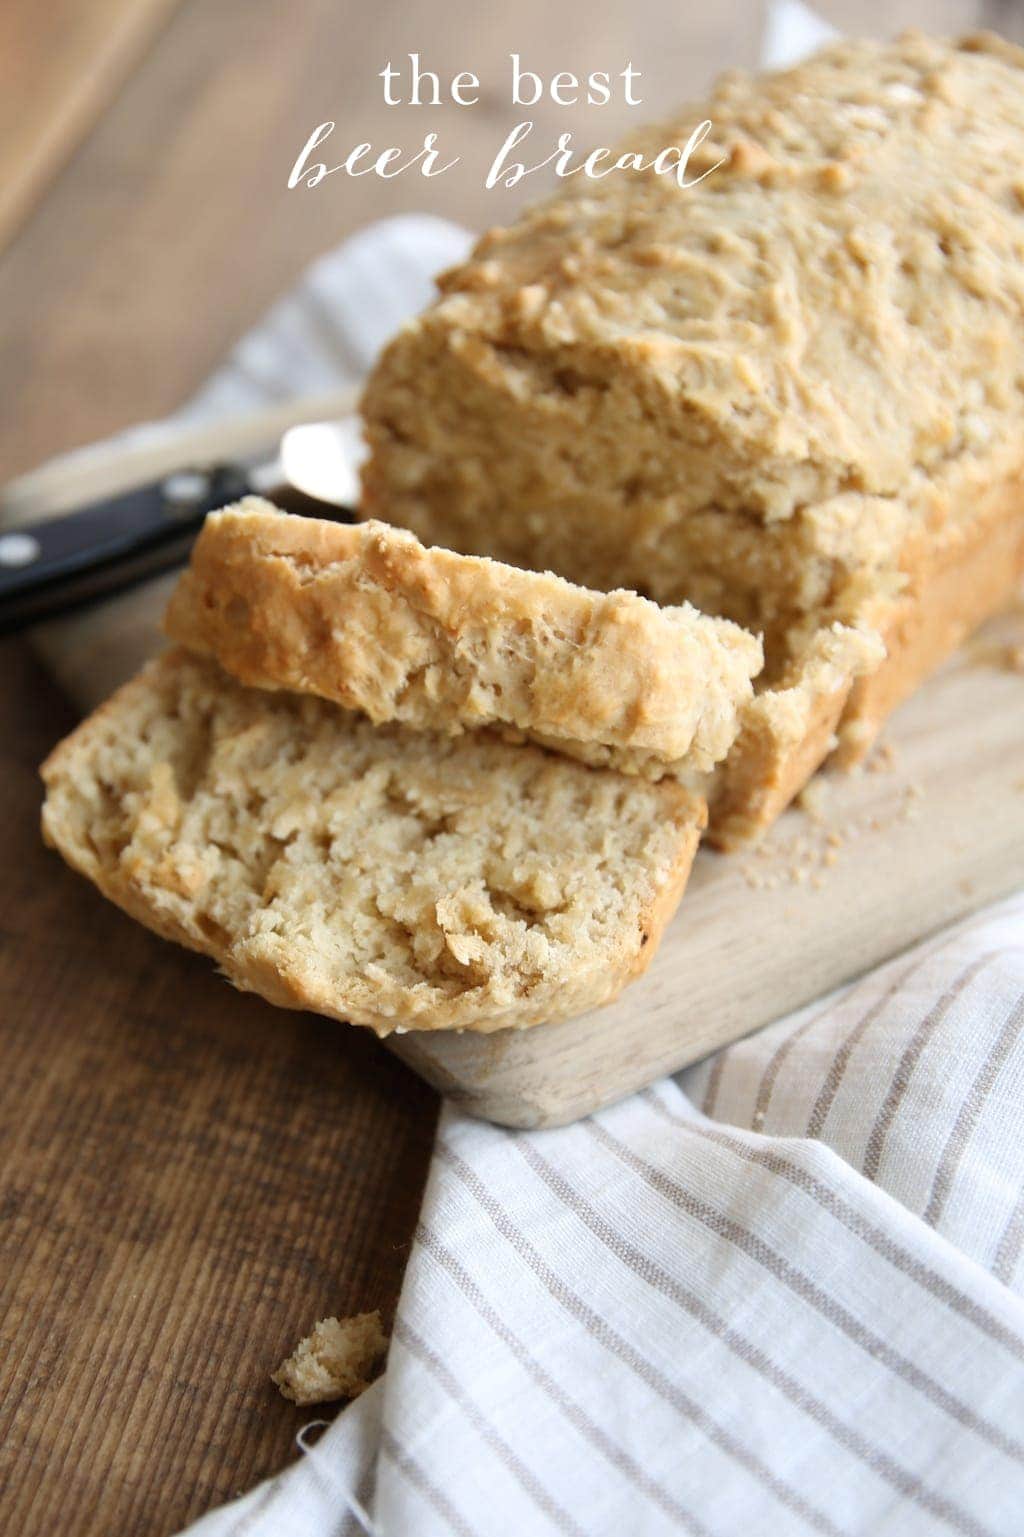 Homemade beer bread recipe made from staple ingredients!